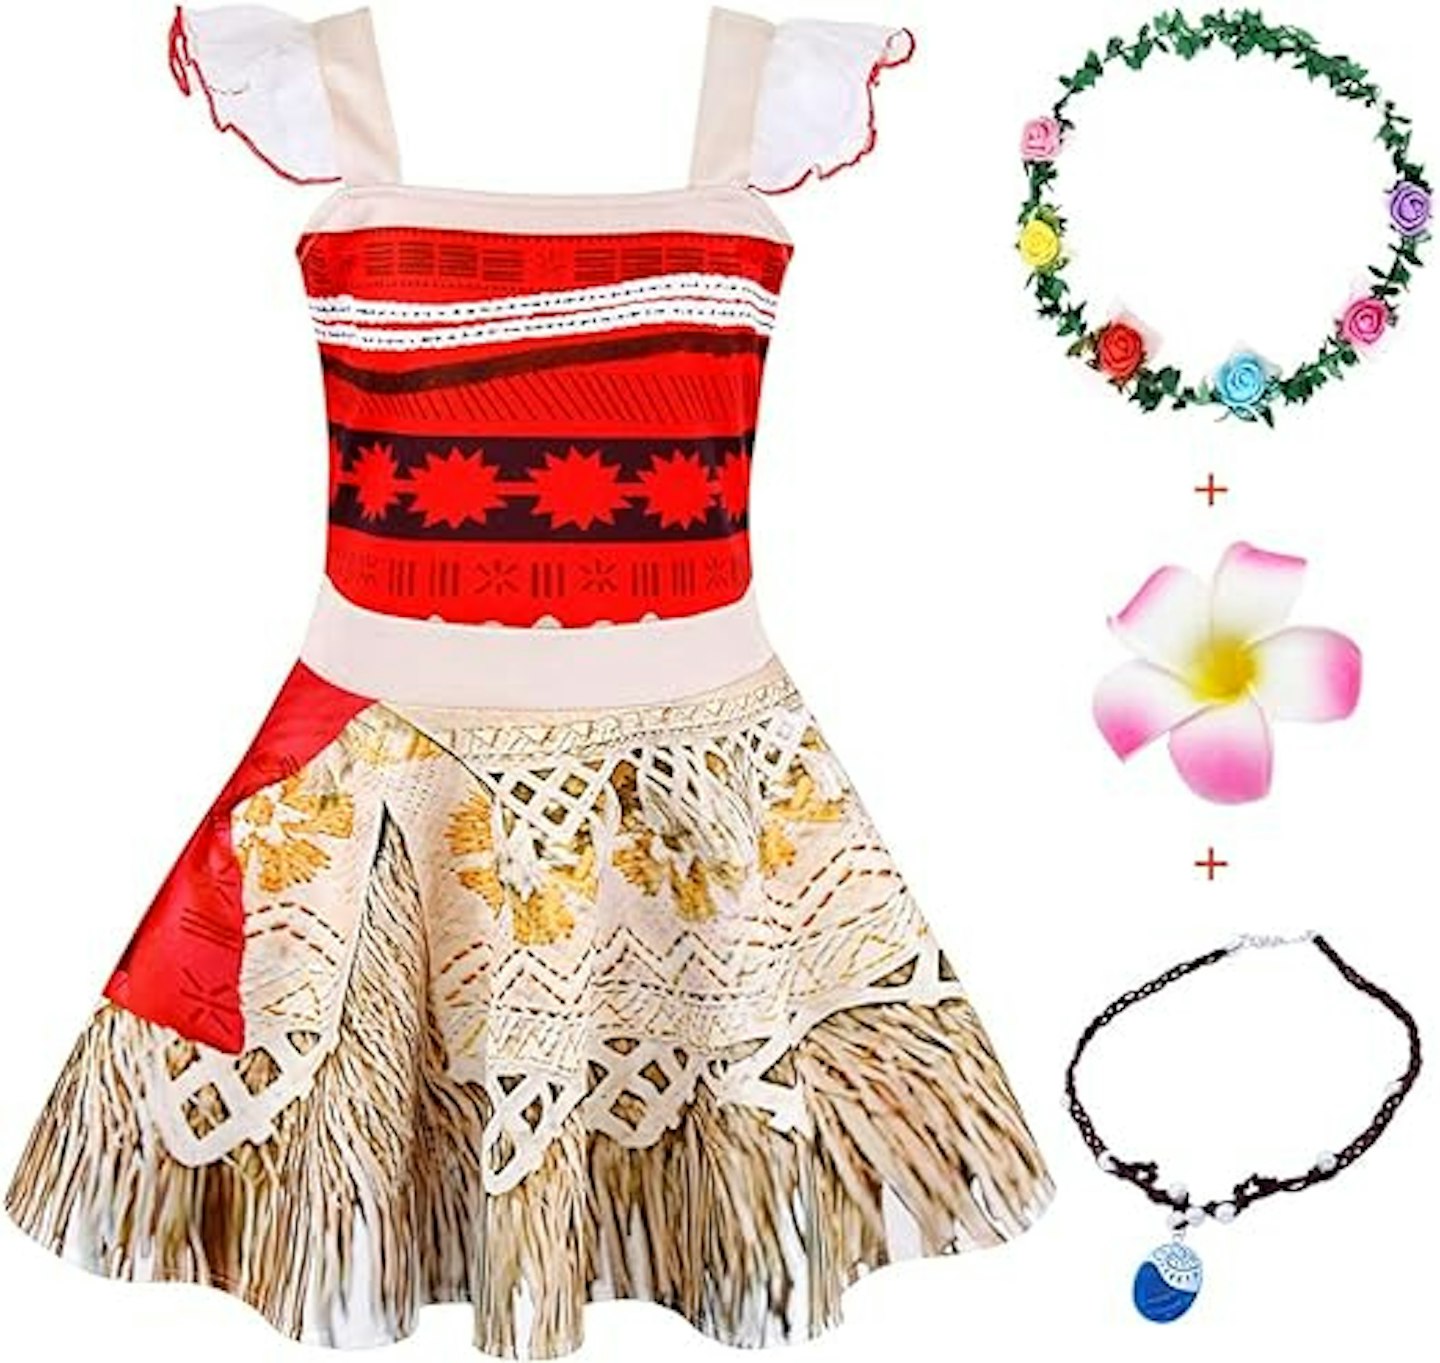 Jurebecia - best Moana outfit